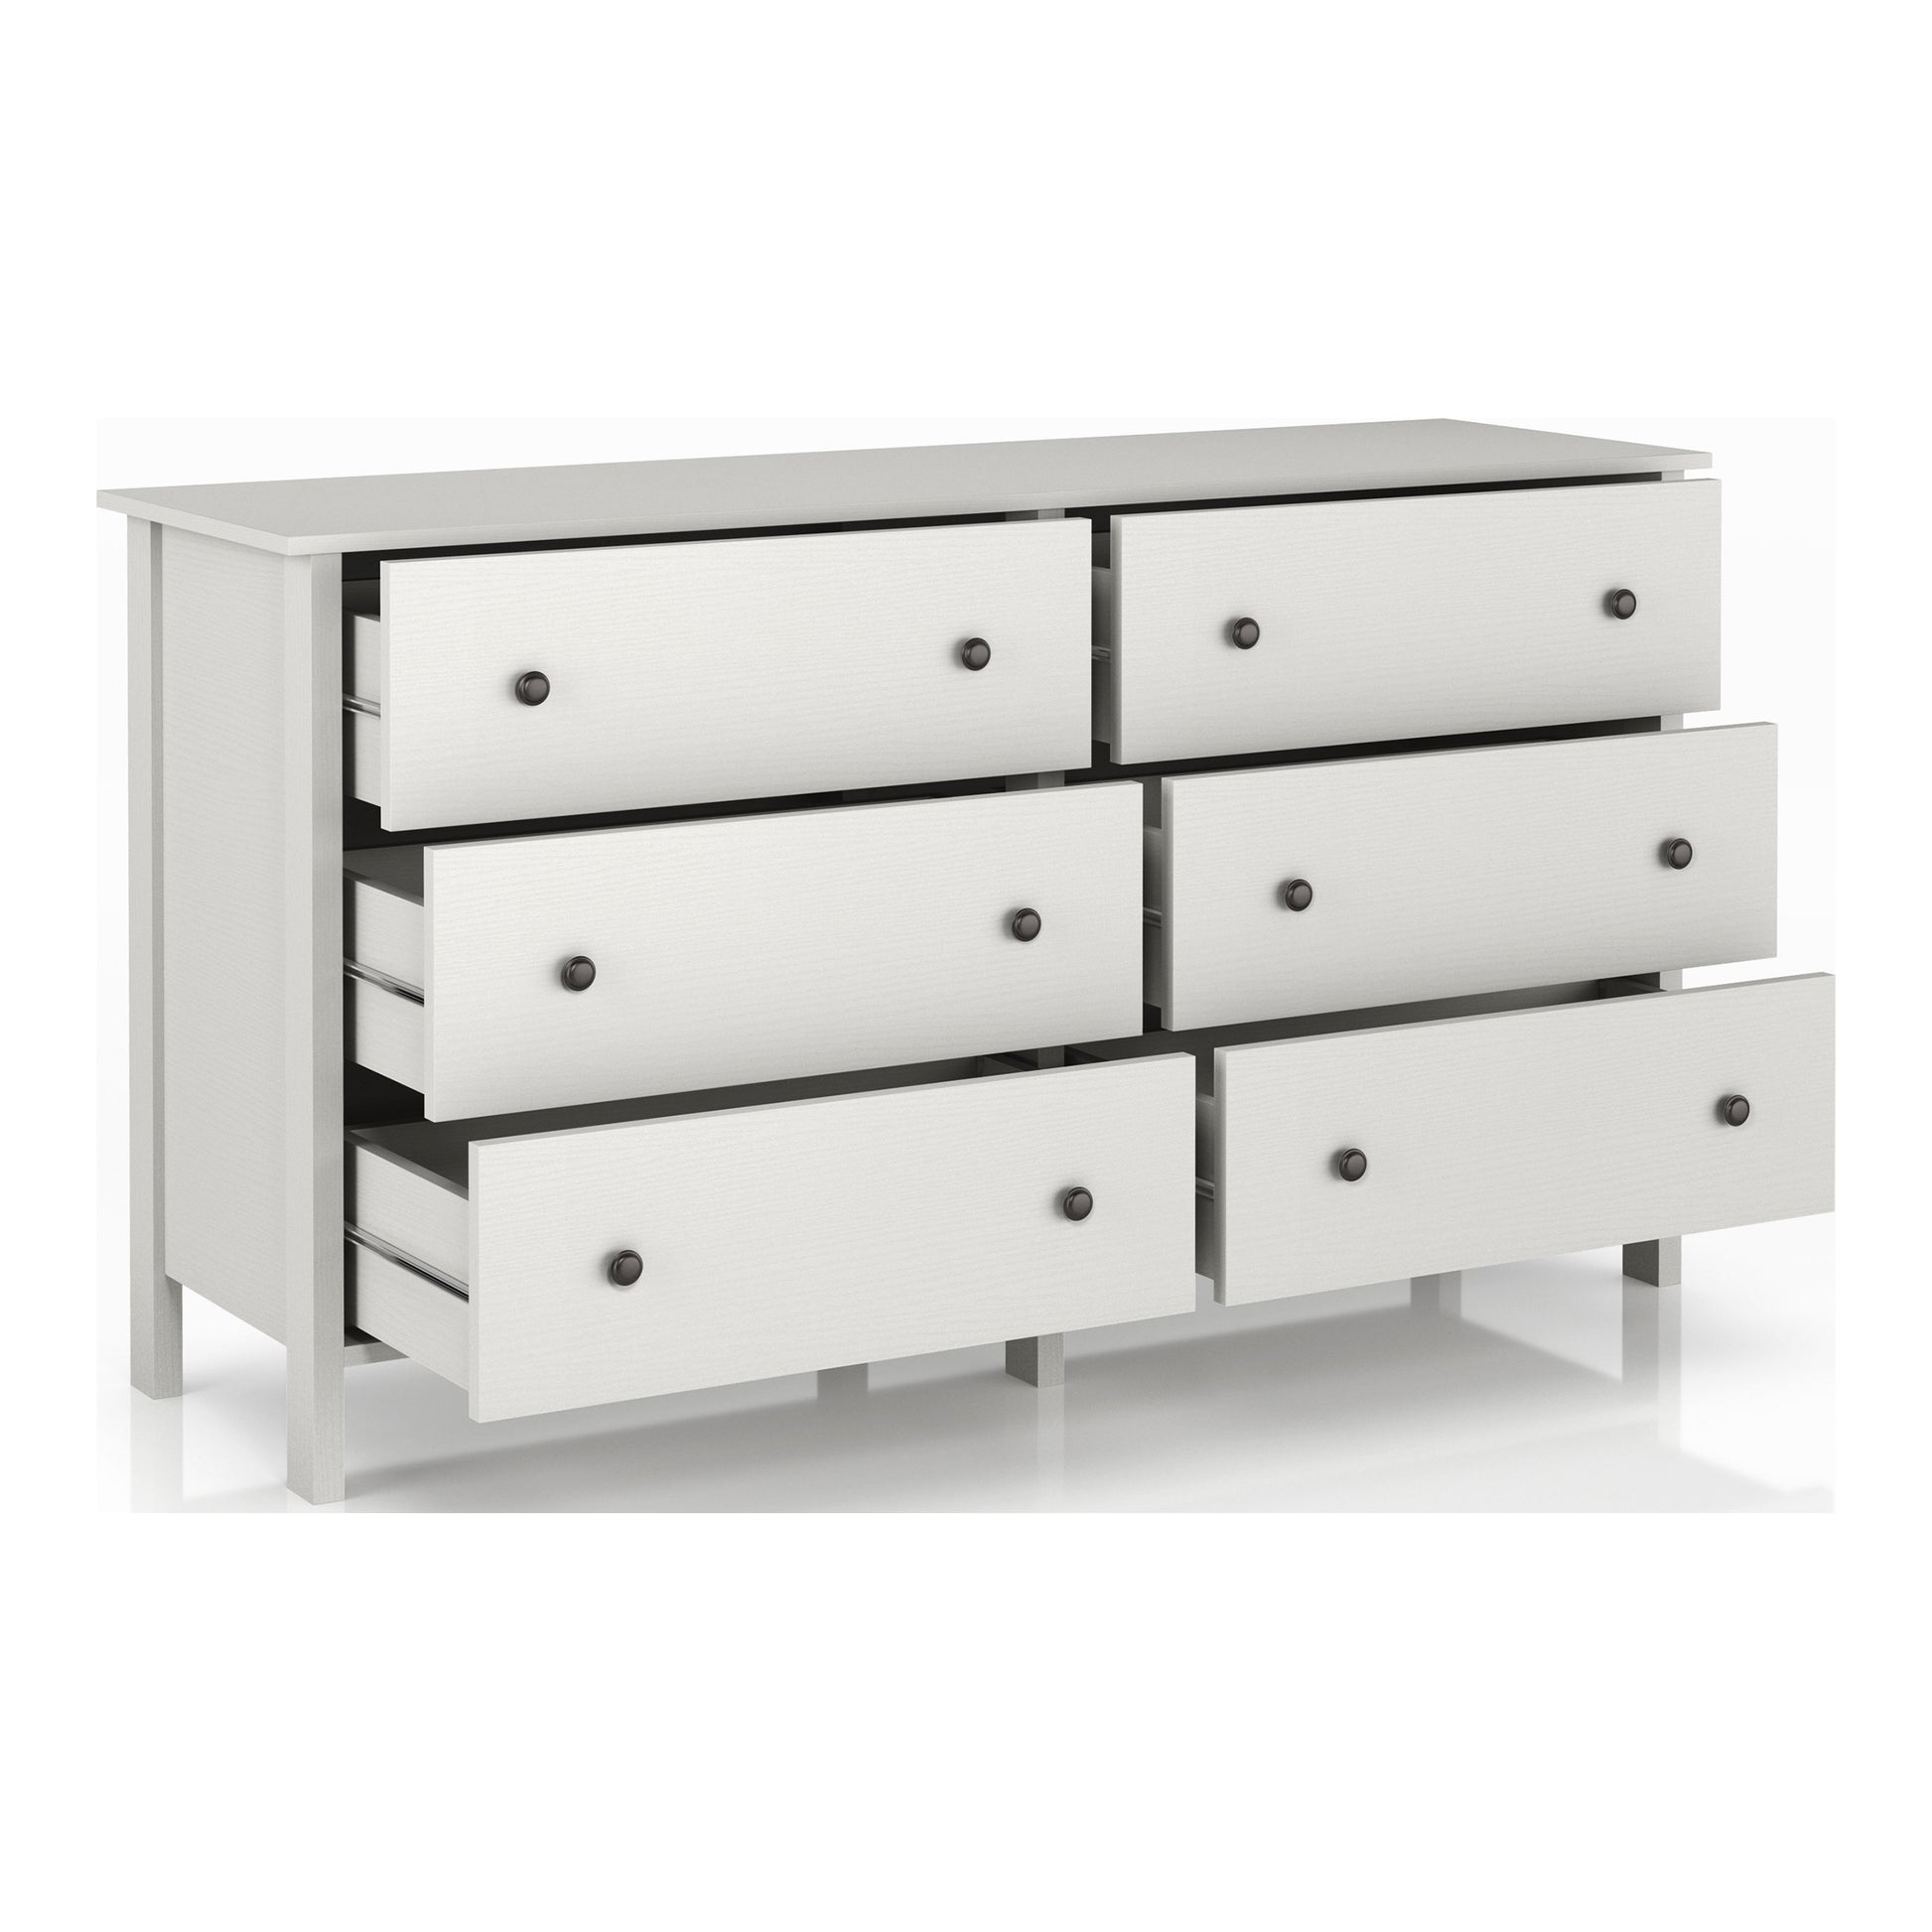 Right angled transitional white six-drawer youth dresser with all drawers open on a white background